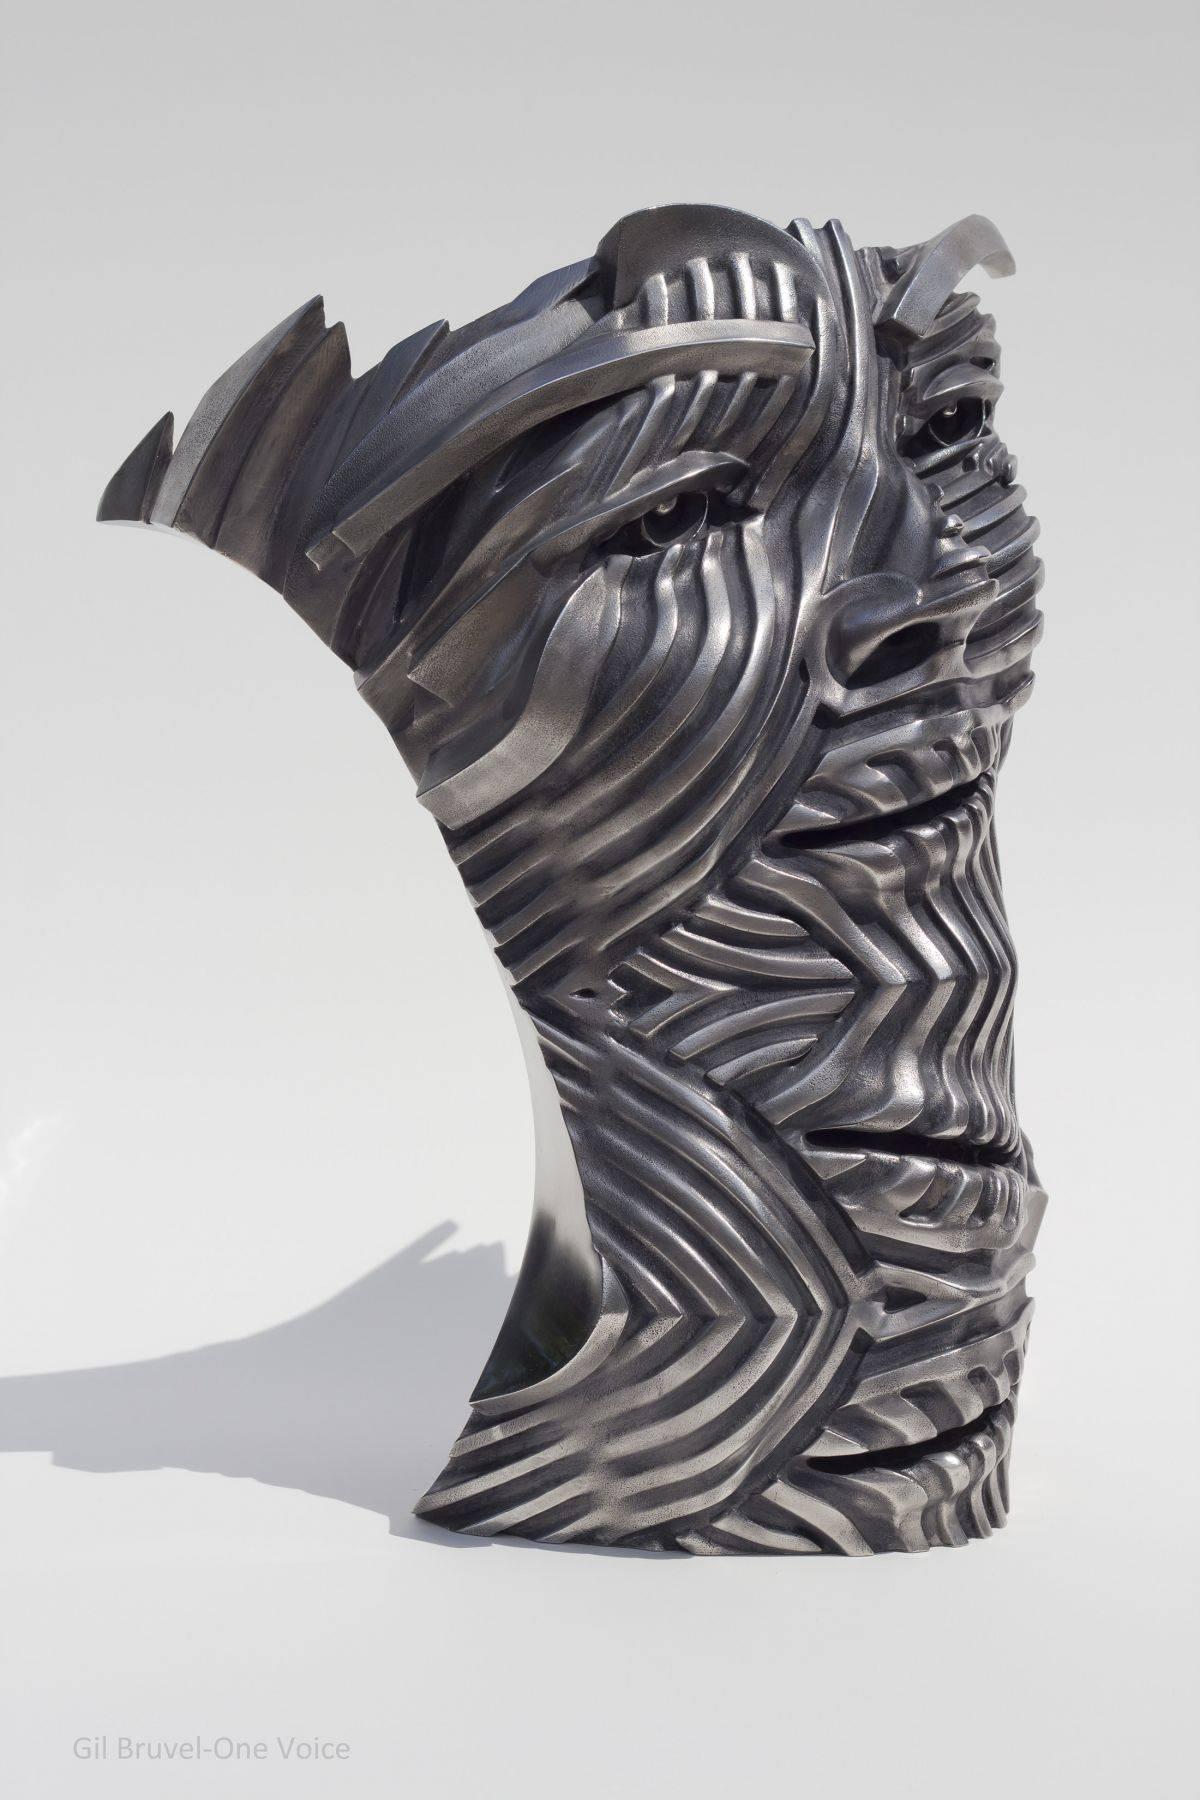 One Voice - Sculpture by Gil Bruvel